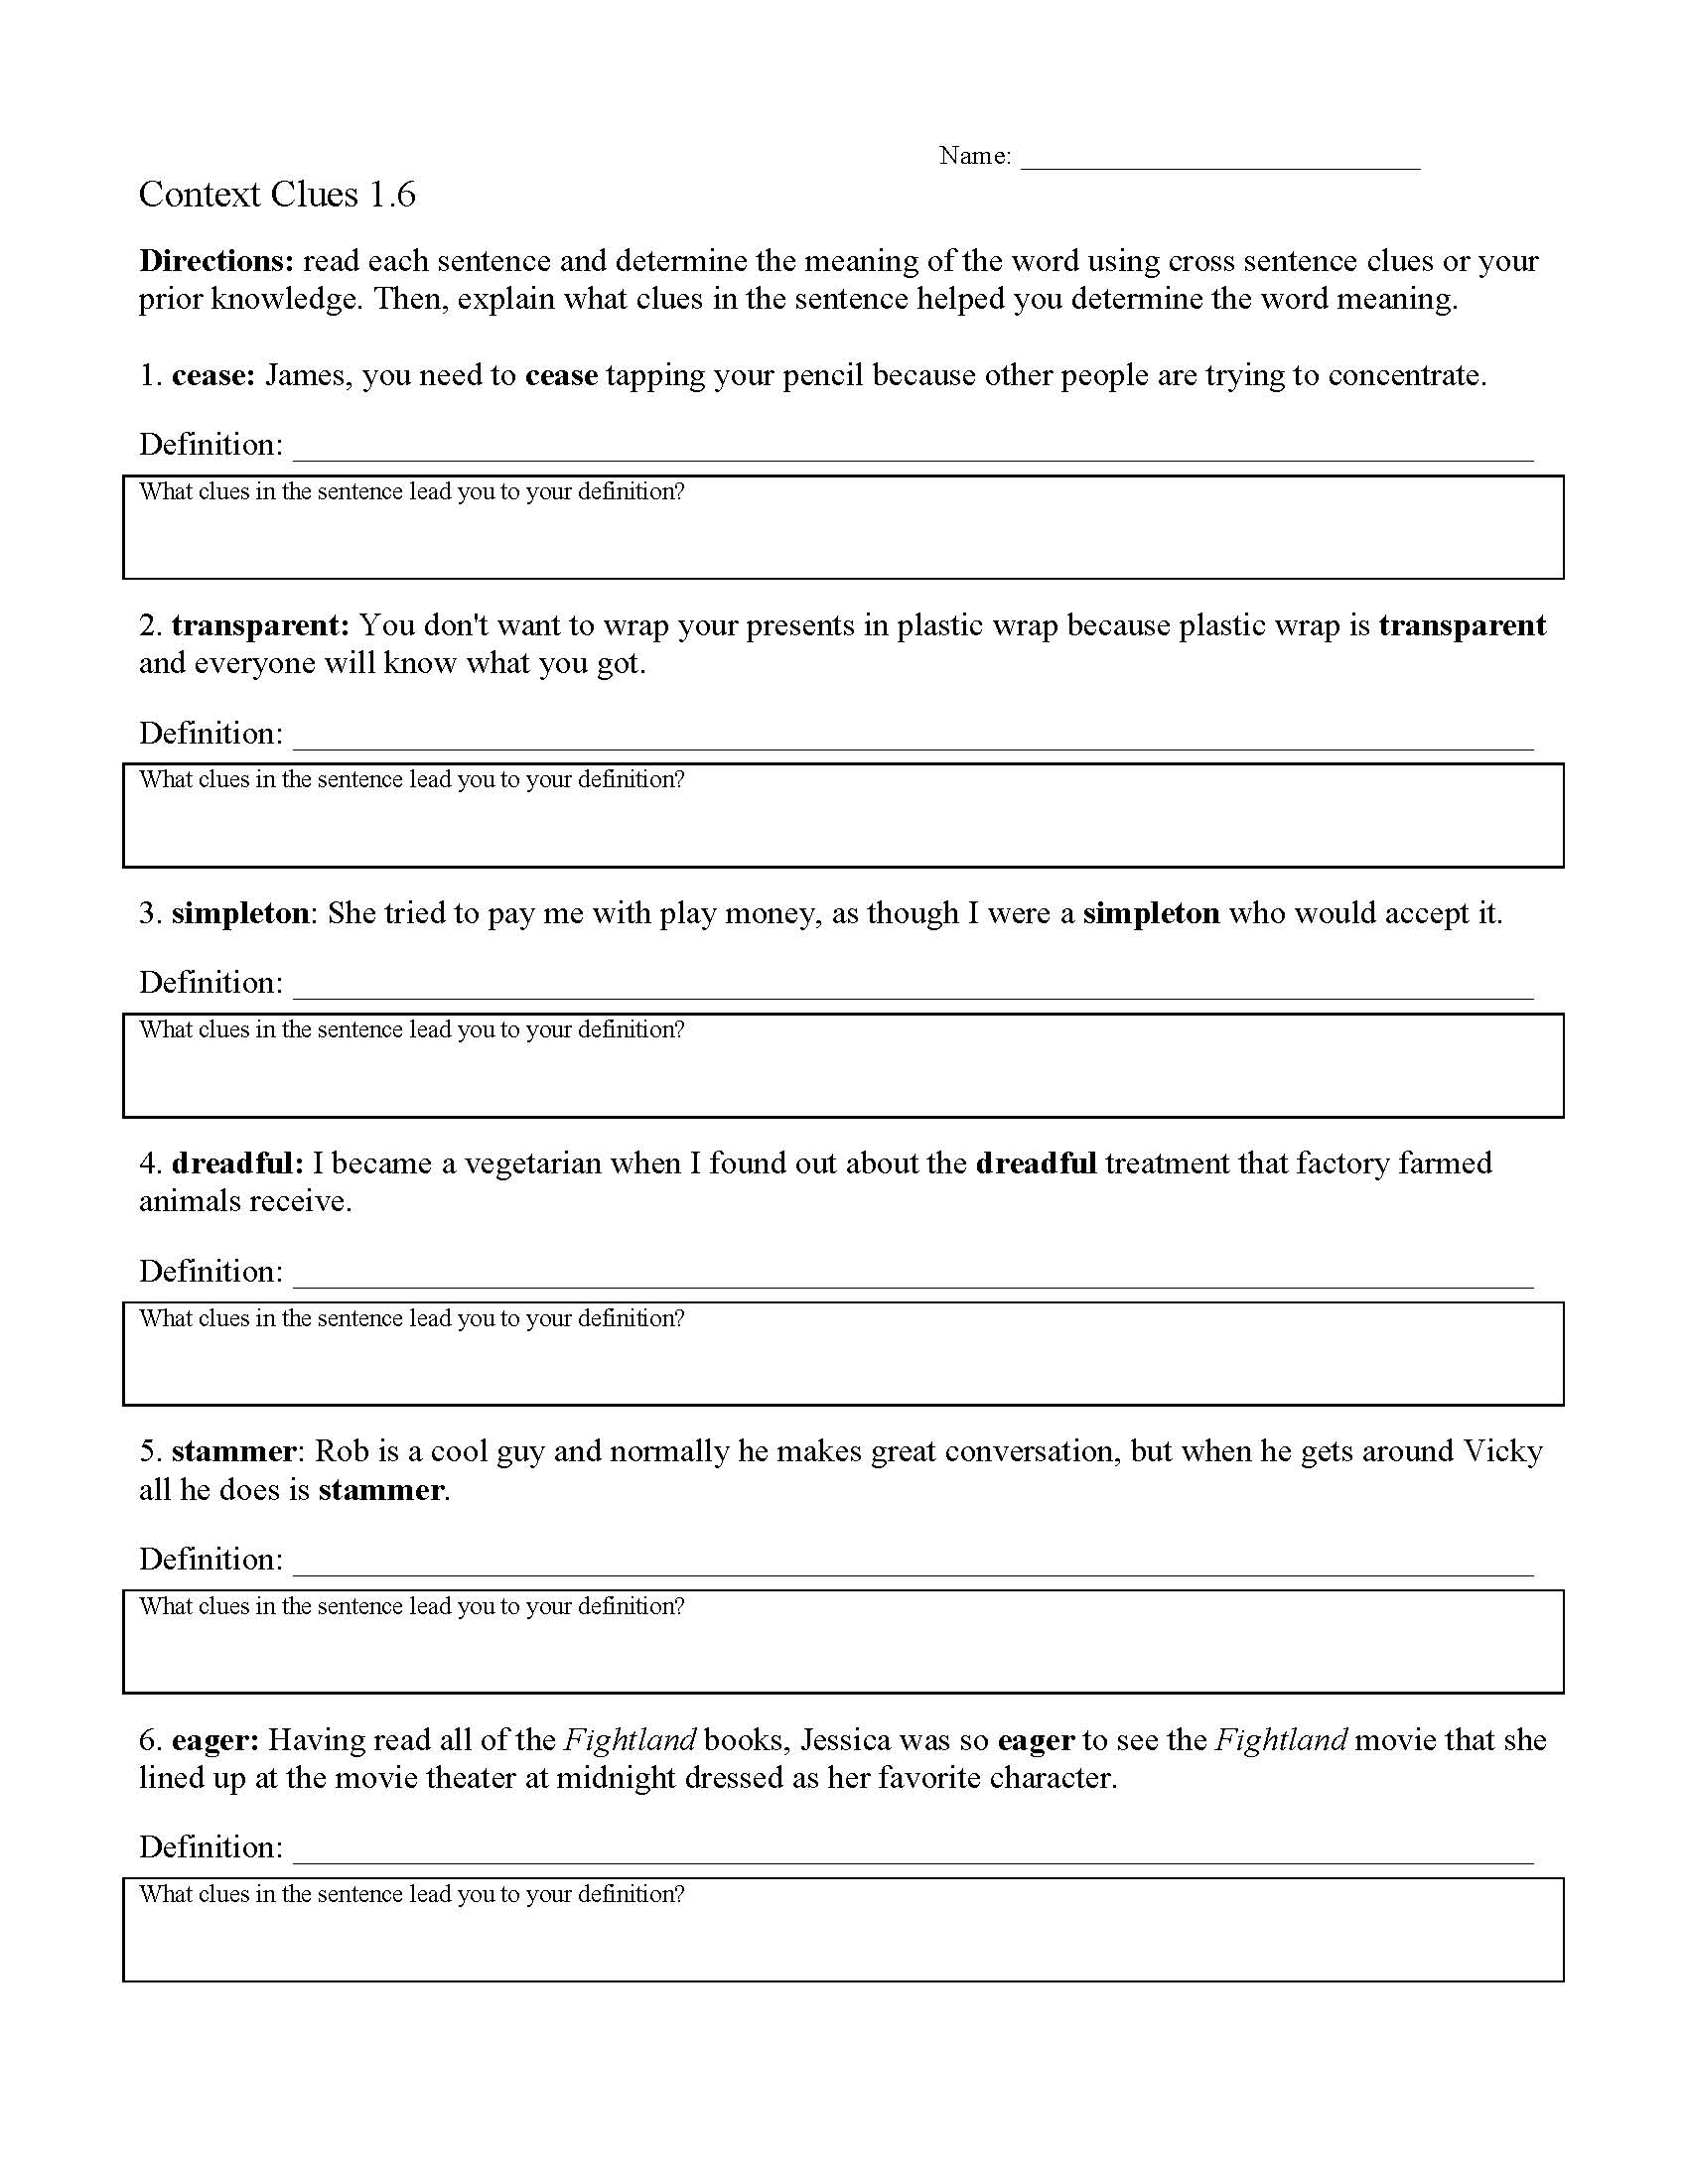 context-clues-worksheet-1-6-preview